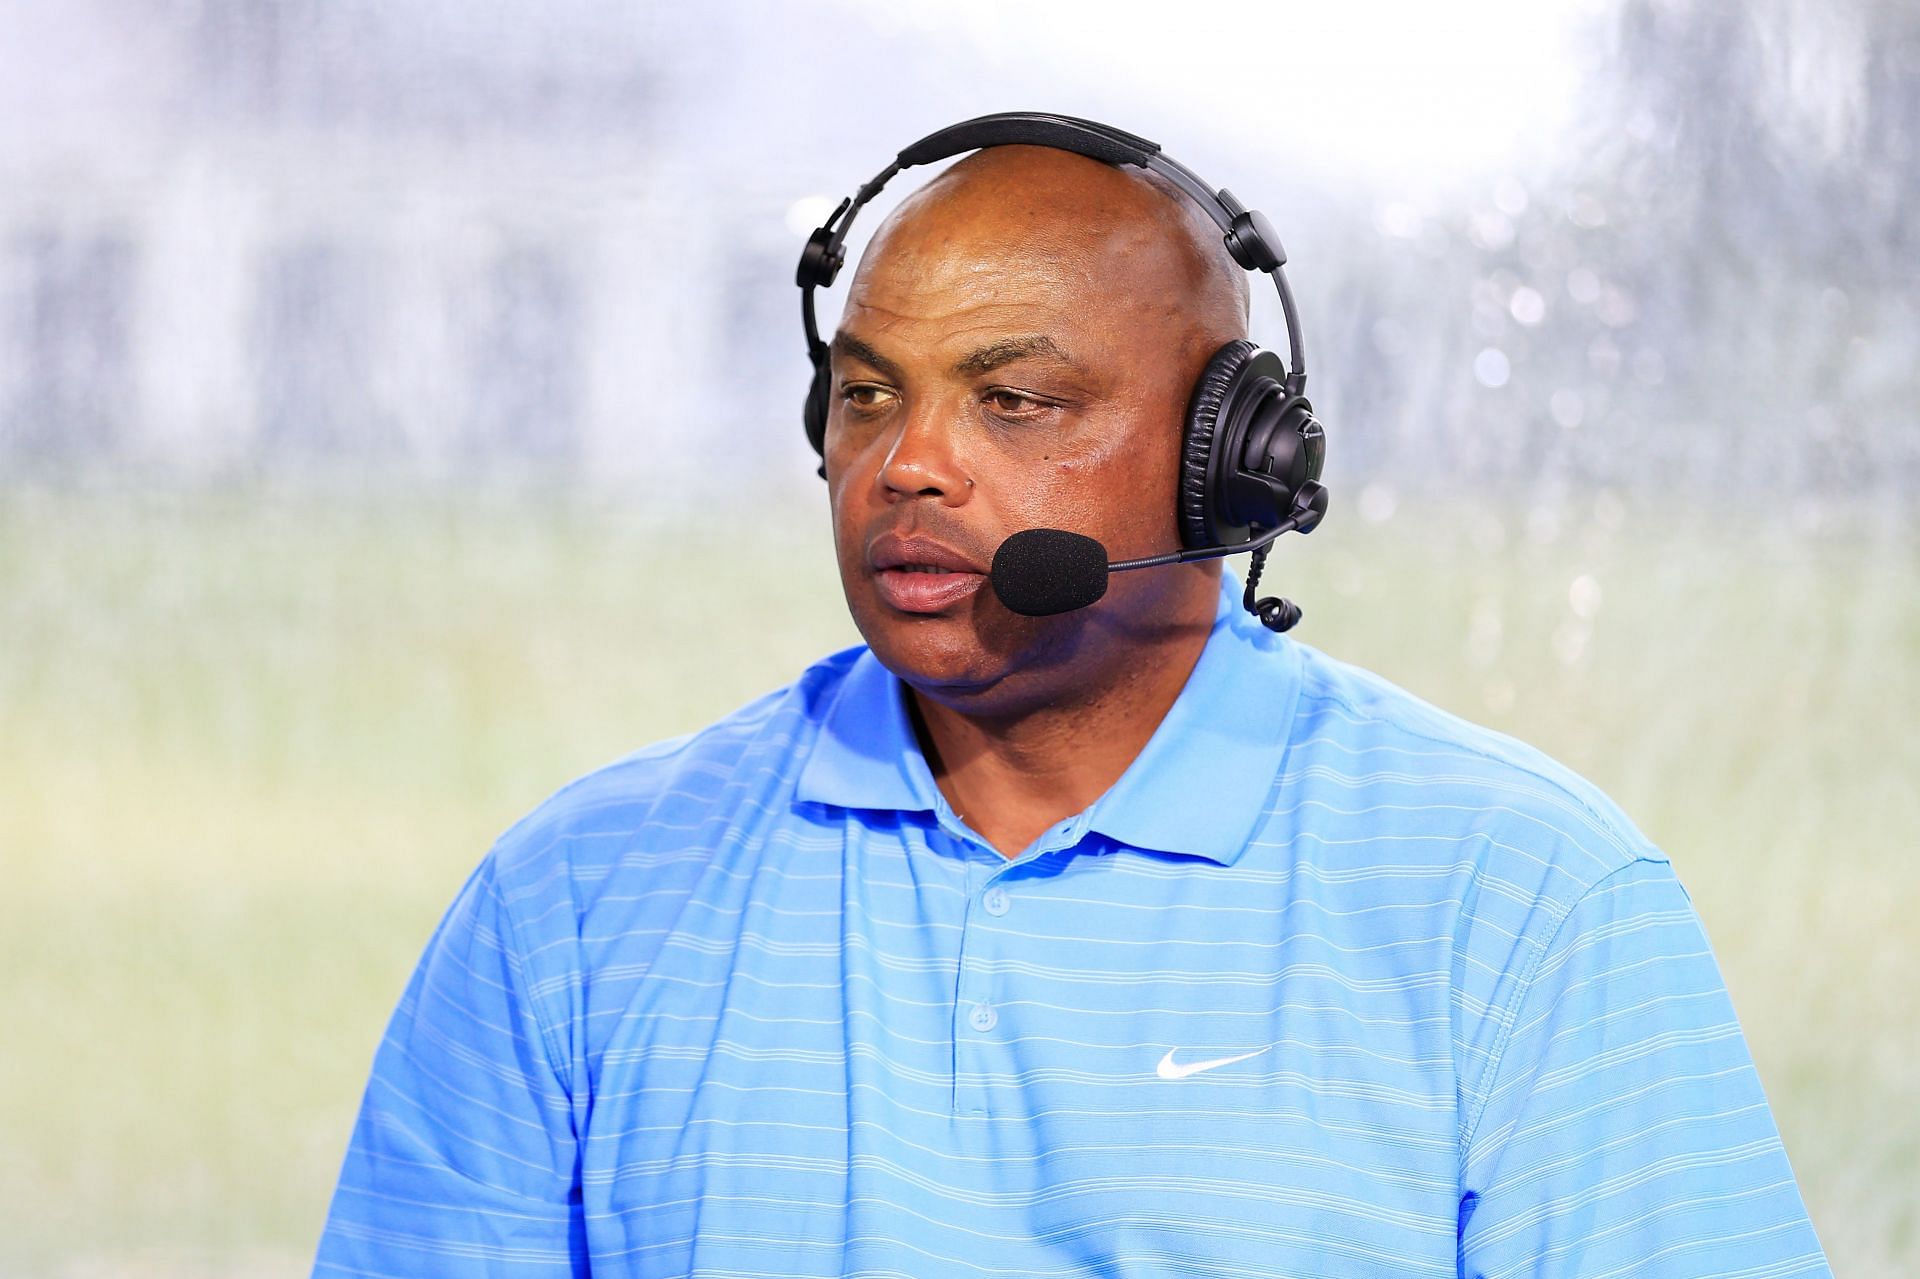 Charles Barkley at the The Match: Champions For Charity